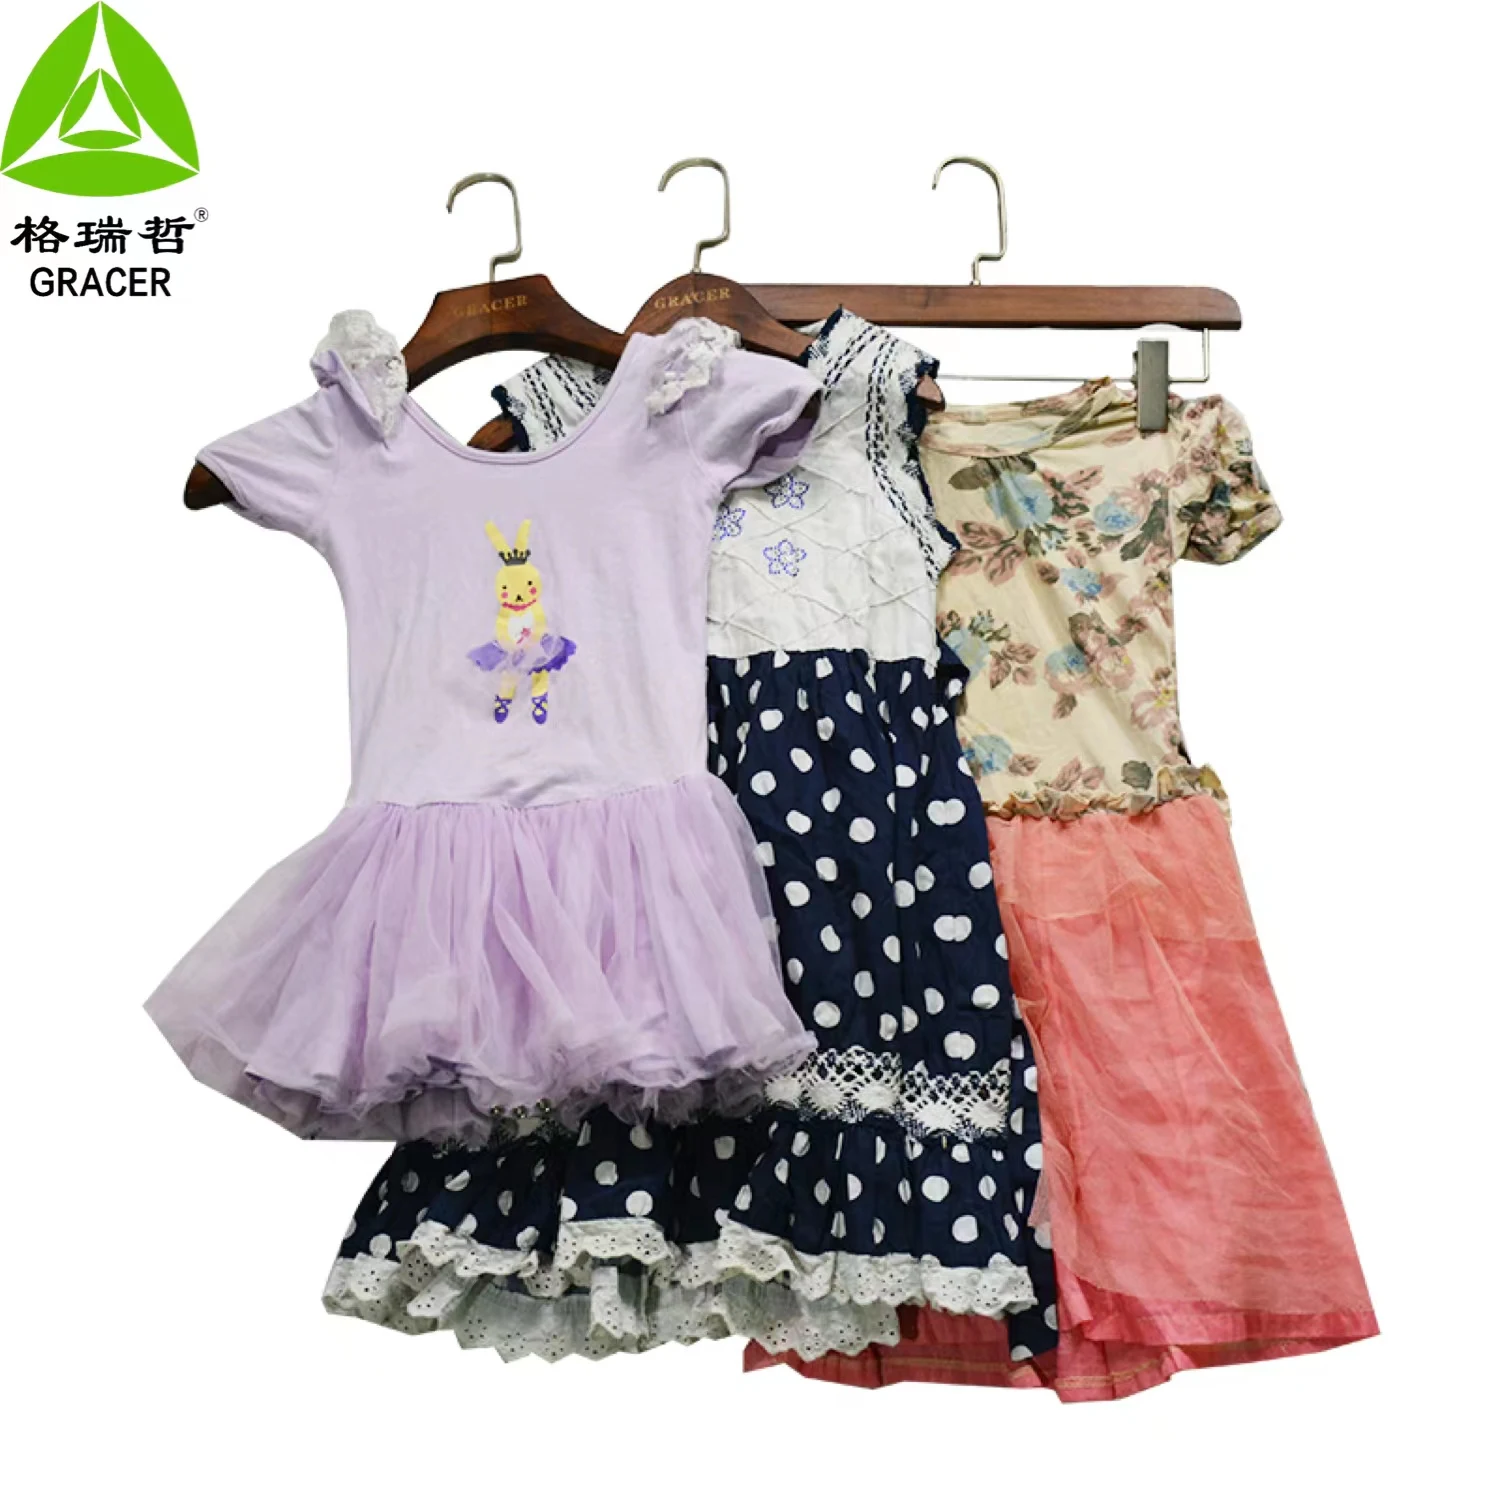 Cheap Wholesale Second Hand Vintage Used Clothing Clothes Summer Children Clothes Kids Recycled Mixed Branded Clothing In Bulk